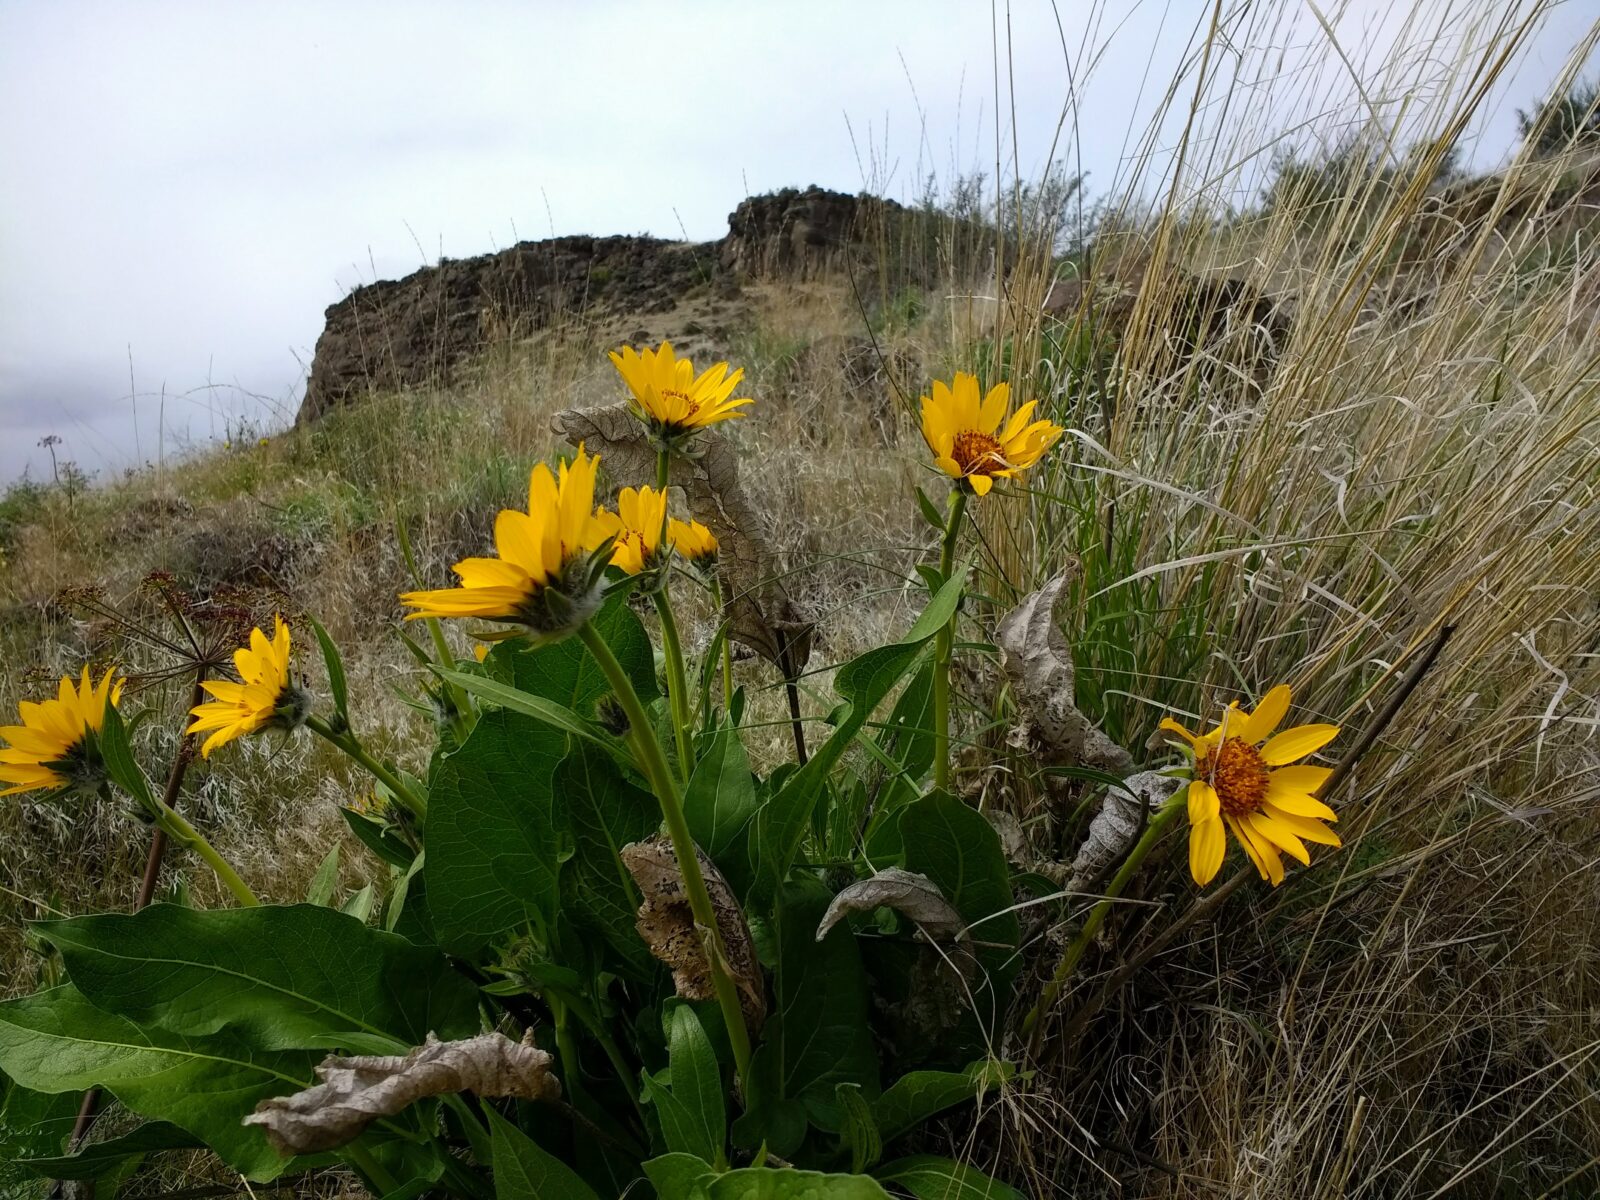 A perfect spring hike near seattle, Cowiche canyon is rocky and full of dry grass and bright yellow wildflowers